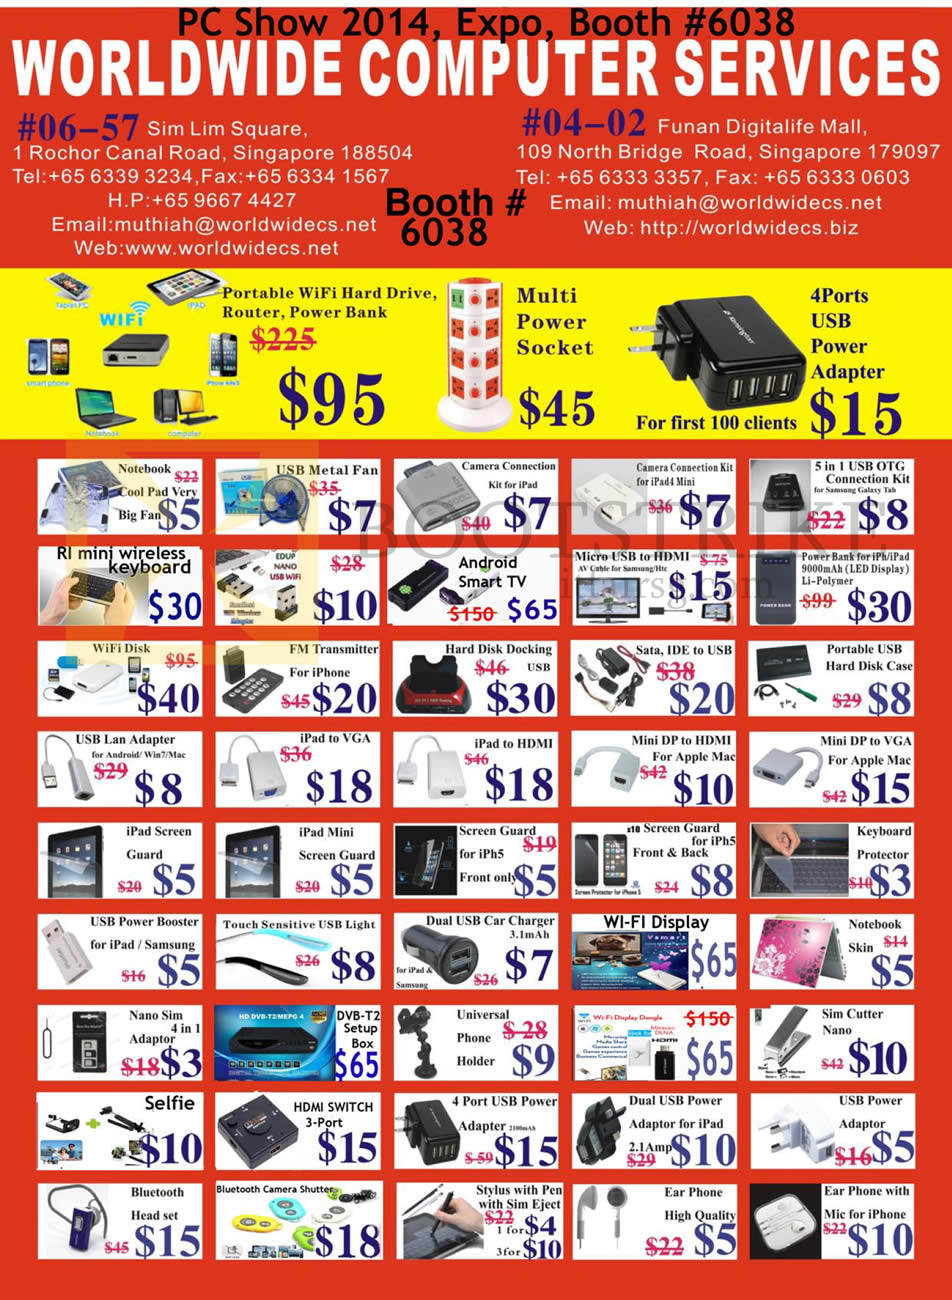 PC SHOW 2014 price list image brochure of Worldwide Computer Services Accessories, Hard Disk Docking Station, 3G Dongle, FM Transmitter, Powerbank, Notebook Cooler, Screen Protector